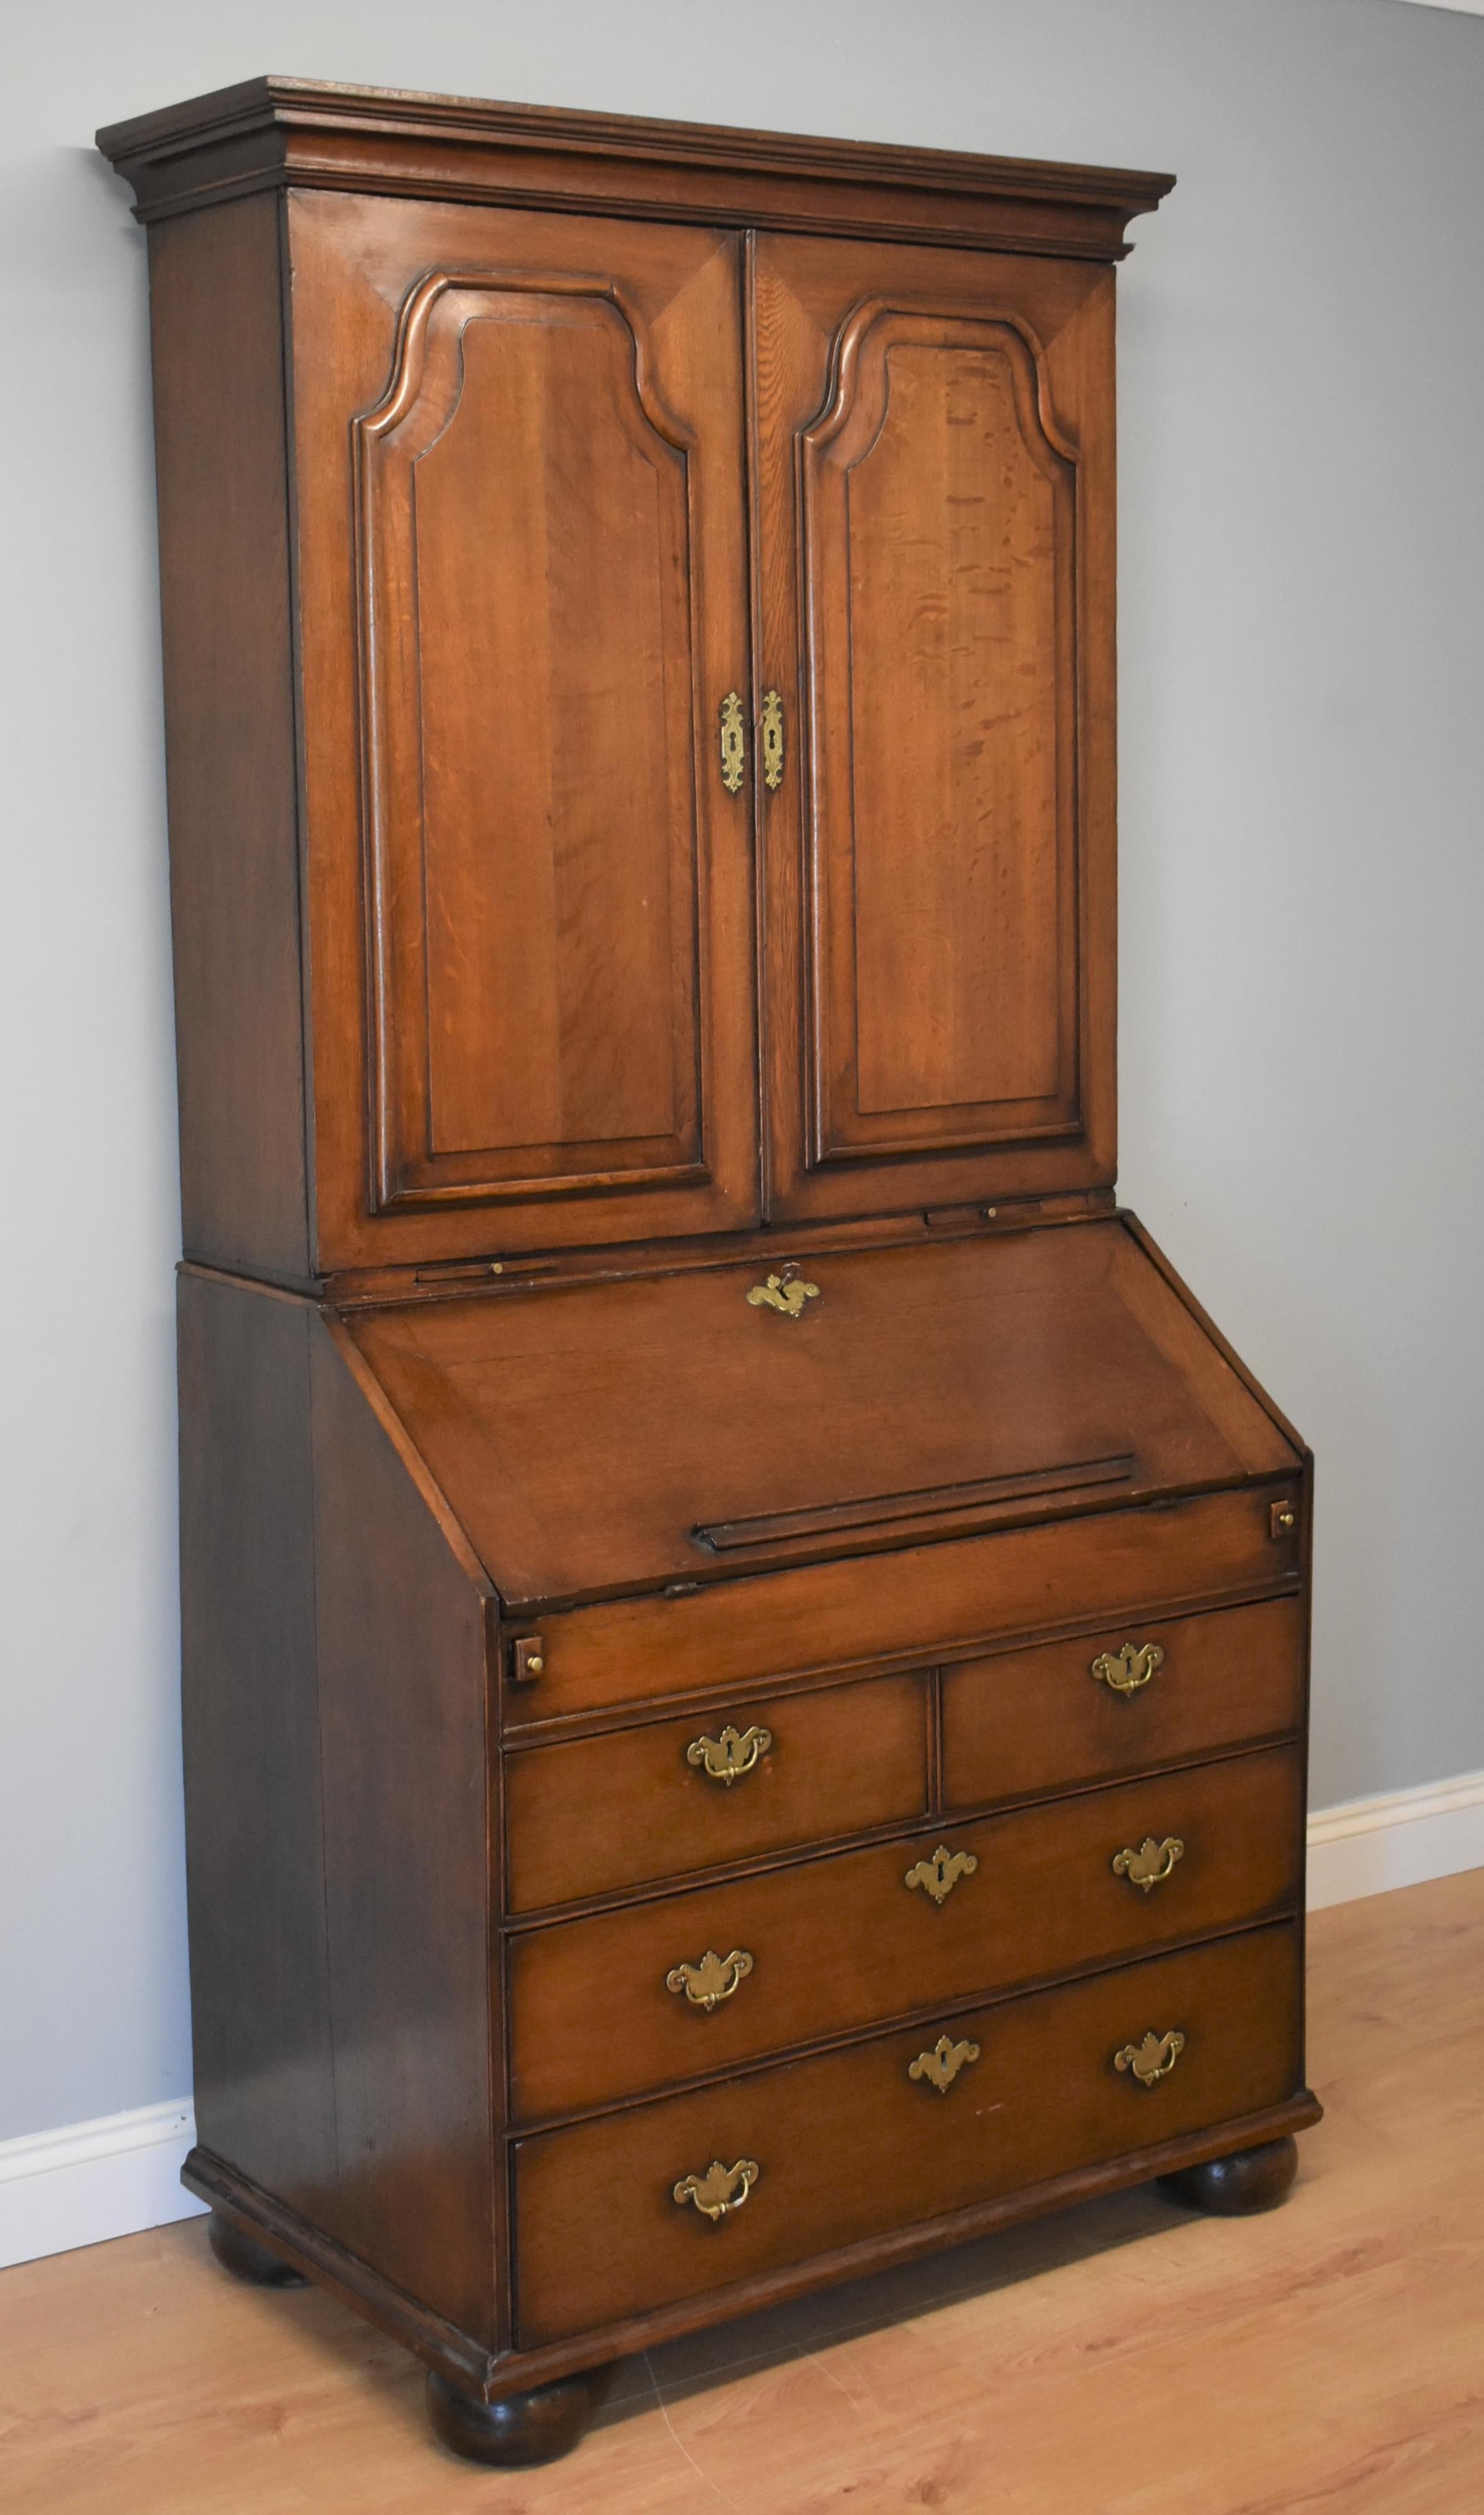 George III antique oak bureau bookcase in good condition with arched panelled doors to the top, when opened reveals a fitted interior with pigeon holes small drawers and central cupboard with a adjustable shelf above. The Bureau bookcase has candle